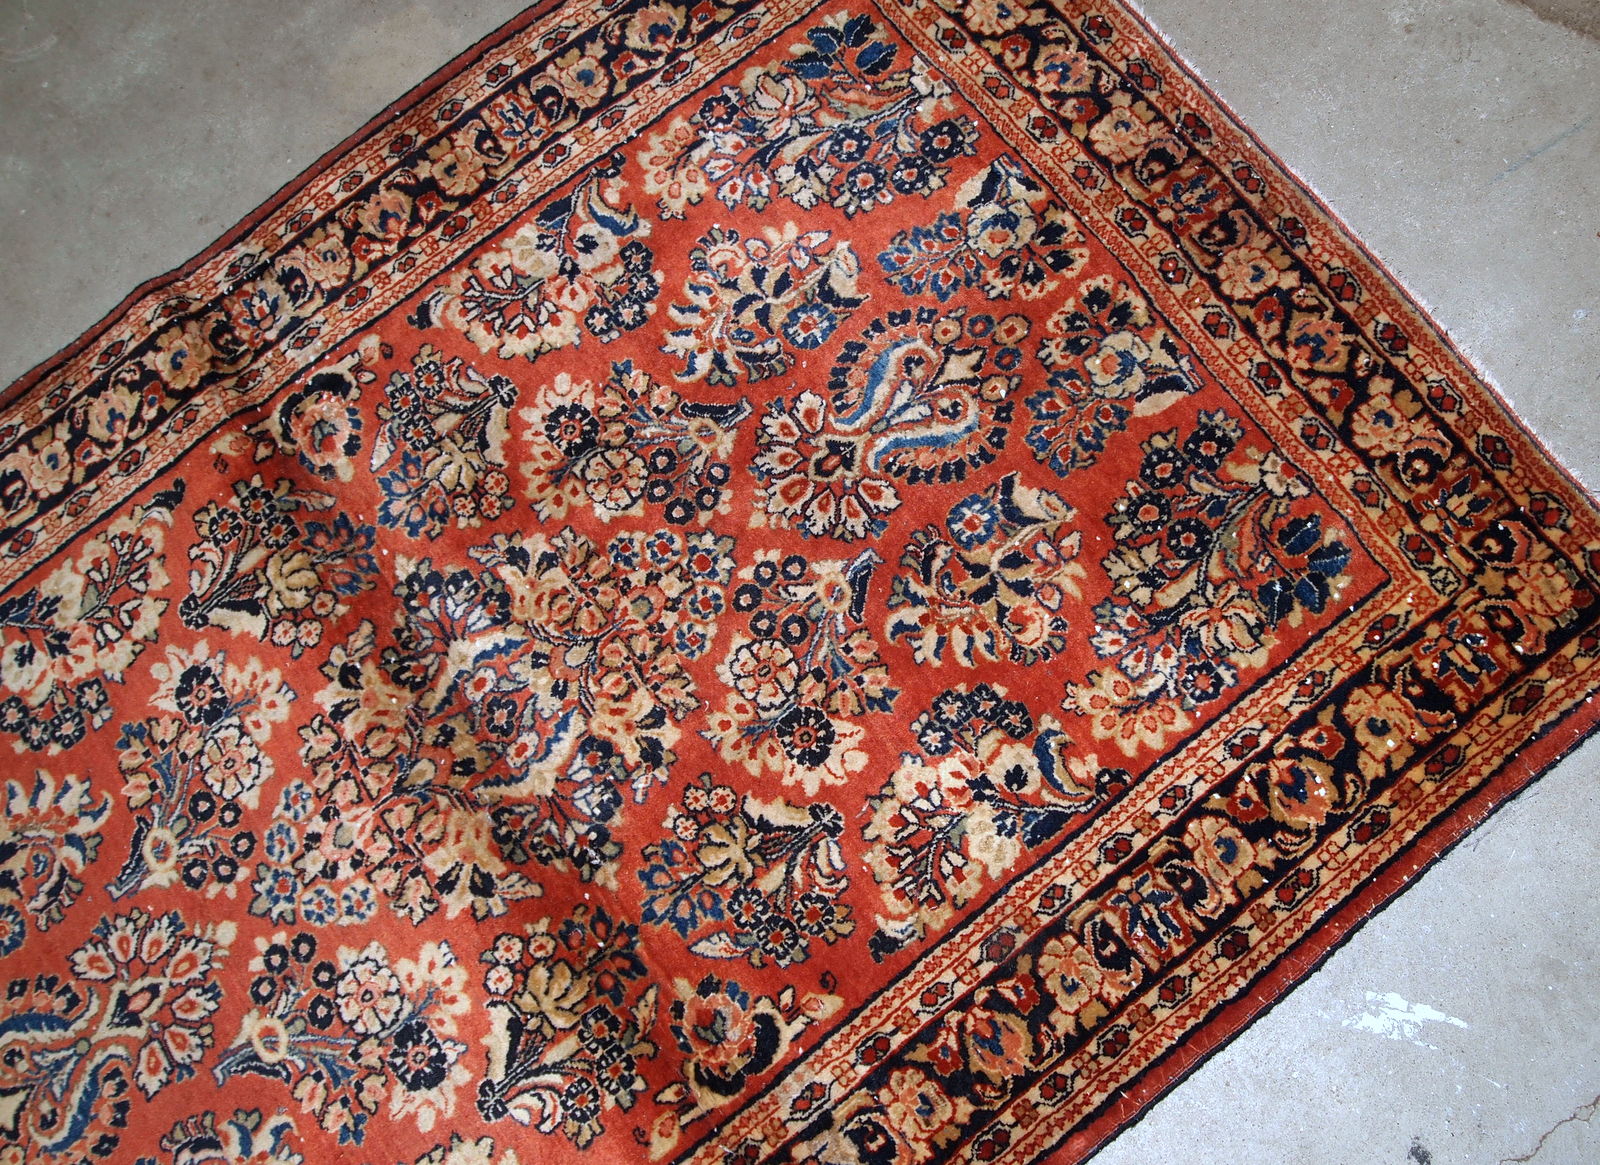 Handmade antique Persian Sarouk rug in original good condition. The rug is from the beginning of 20th century made in traditional floral design.